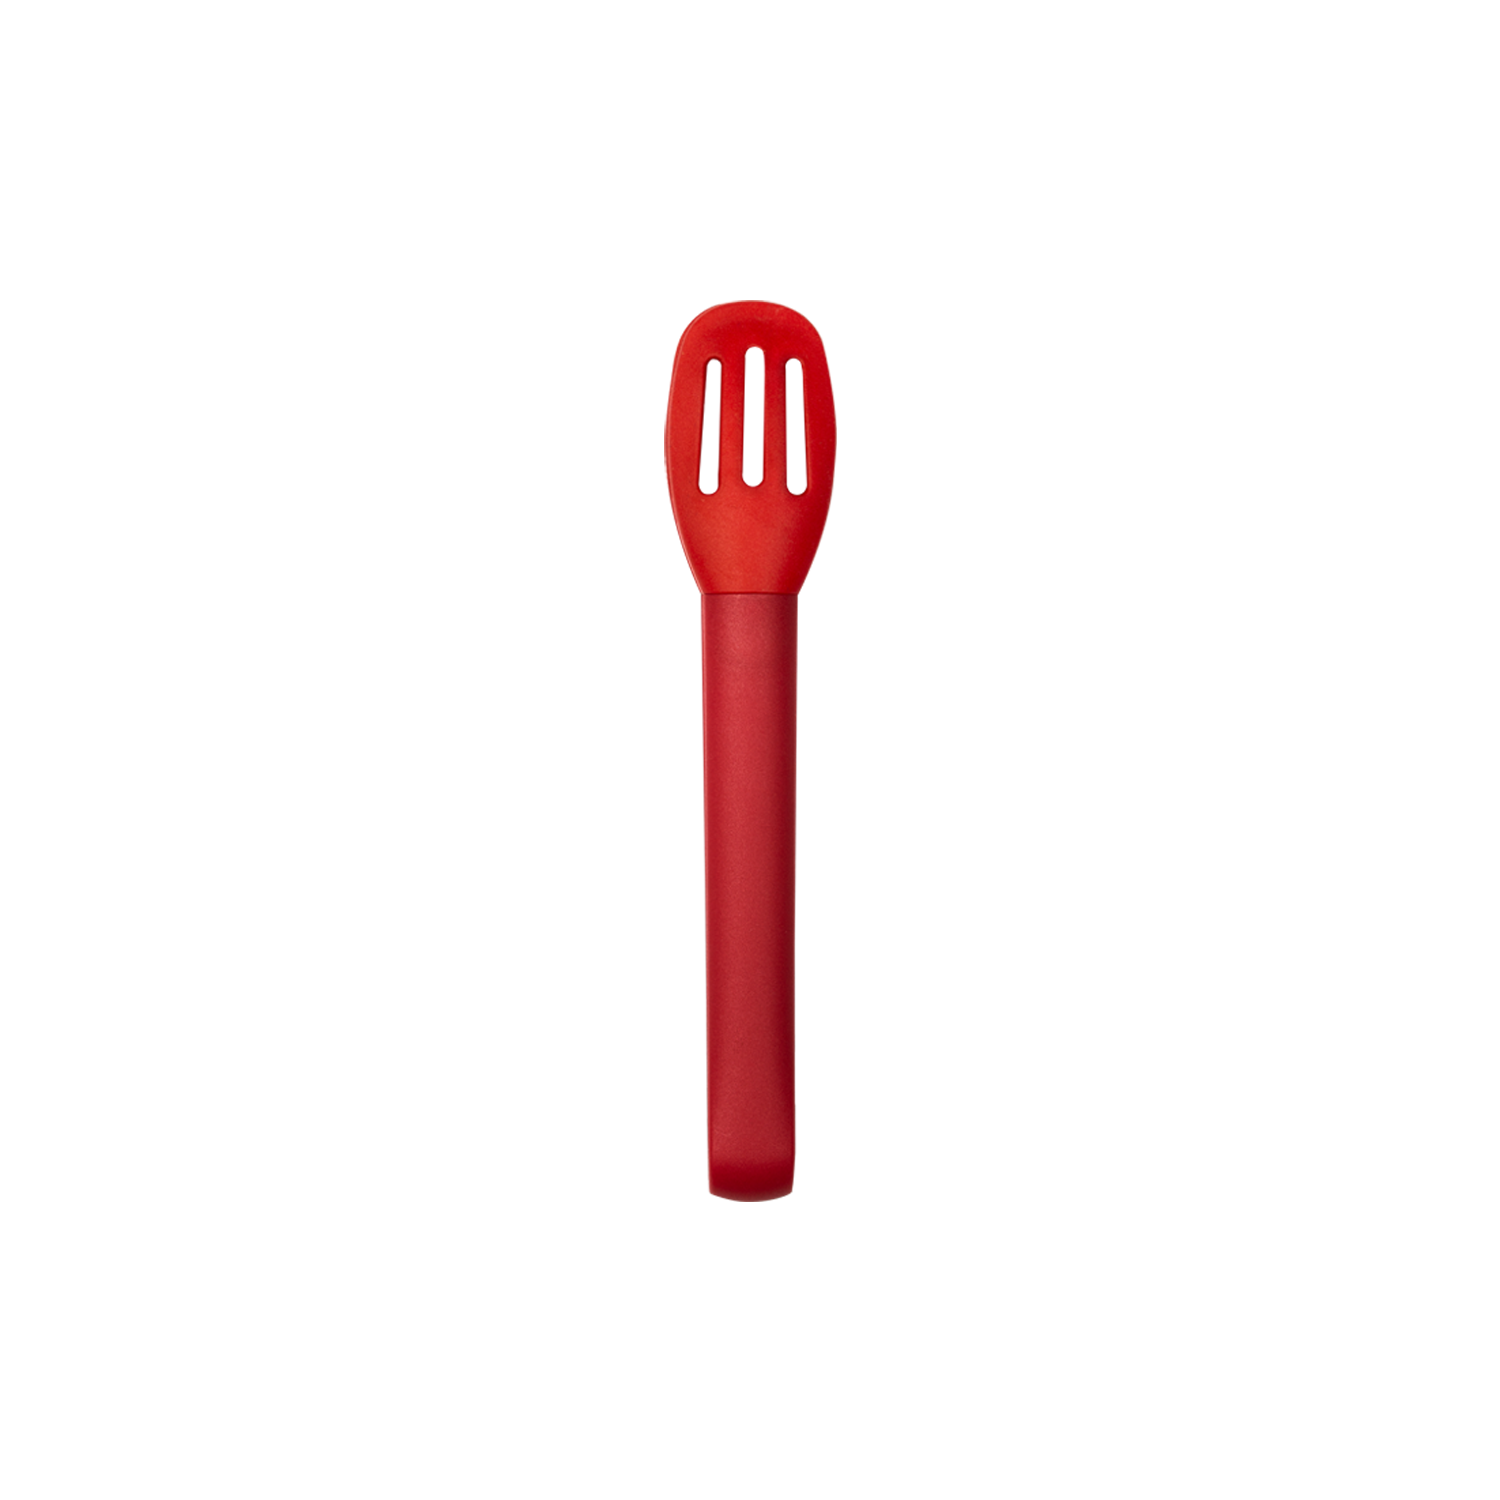 Mad Hungry 3 Piece Silicone Spurtle Set RED in Gift Box Stocking Stuffer